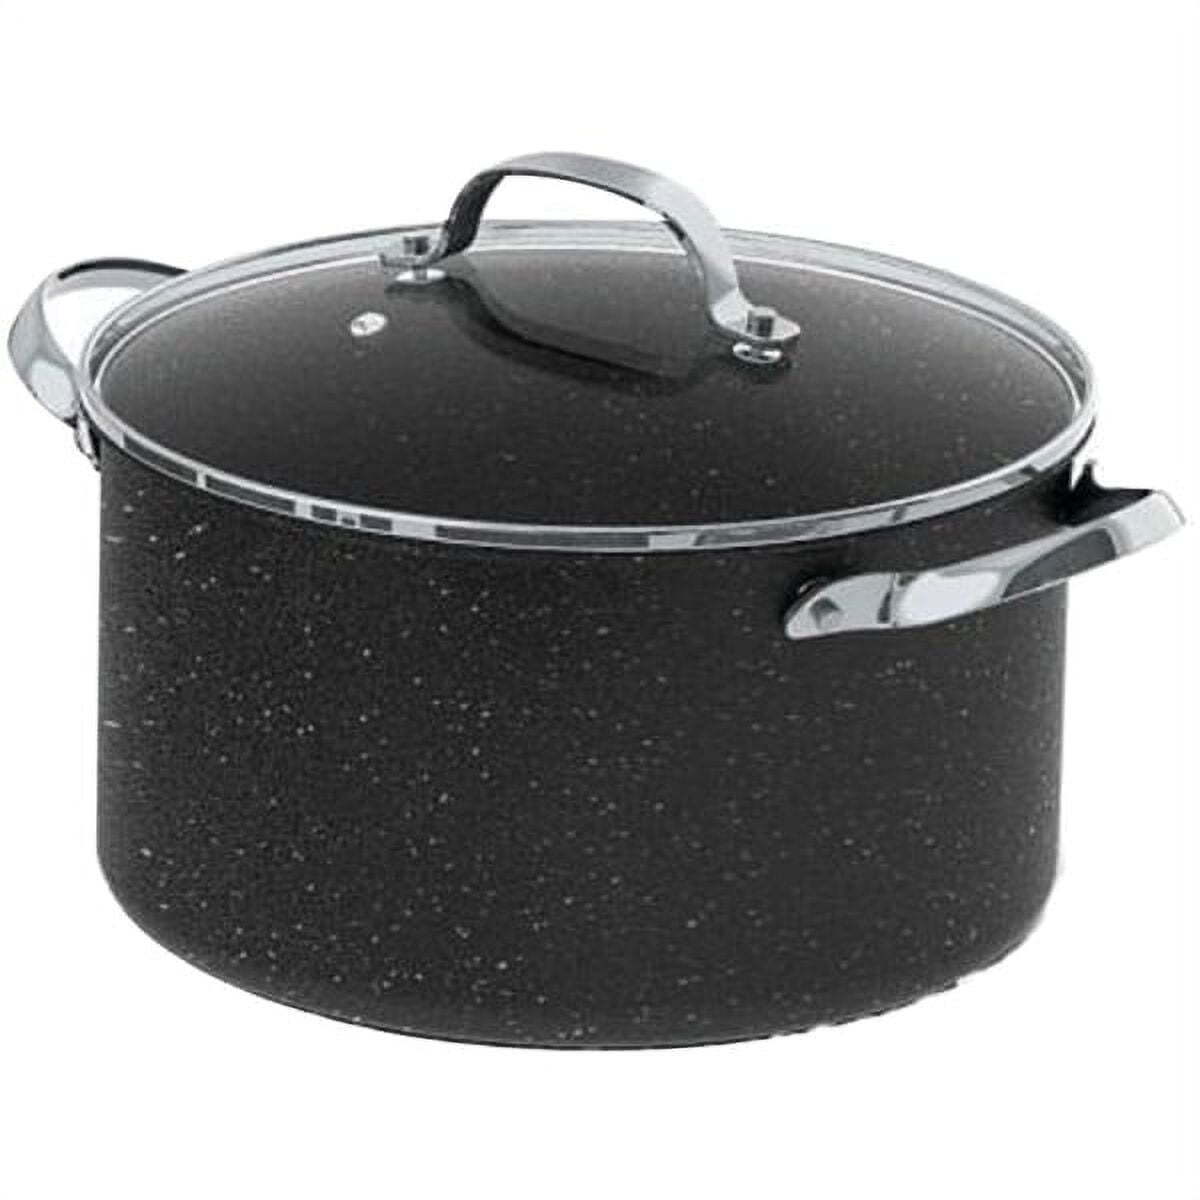 The Rock by Starfrit 060317-002-0000 6 qt Stockpot with Glass Lid